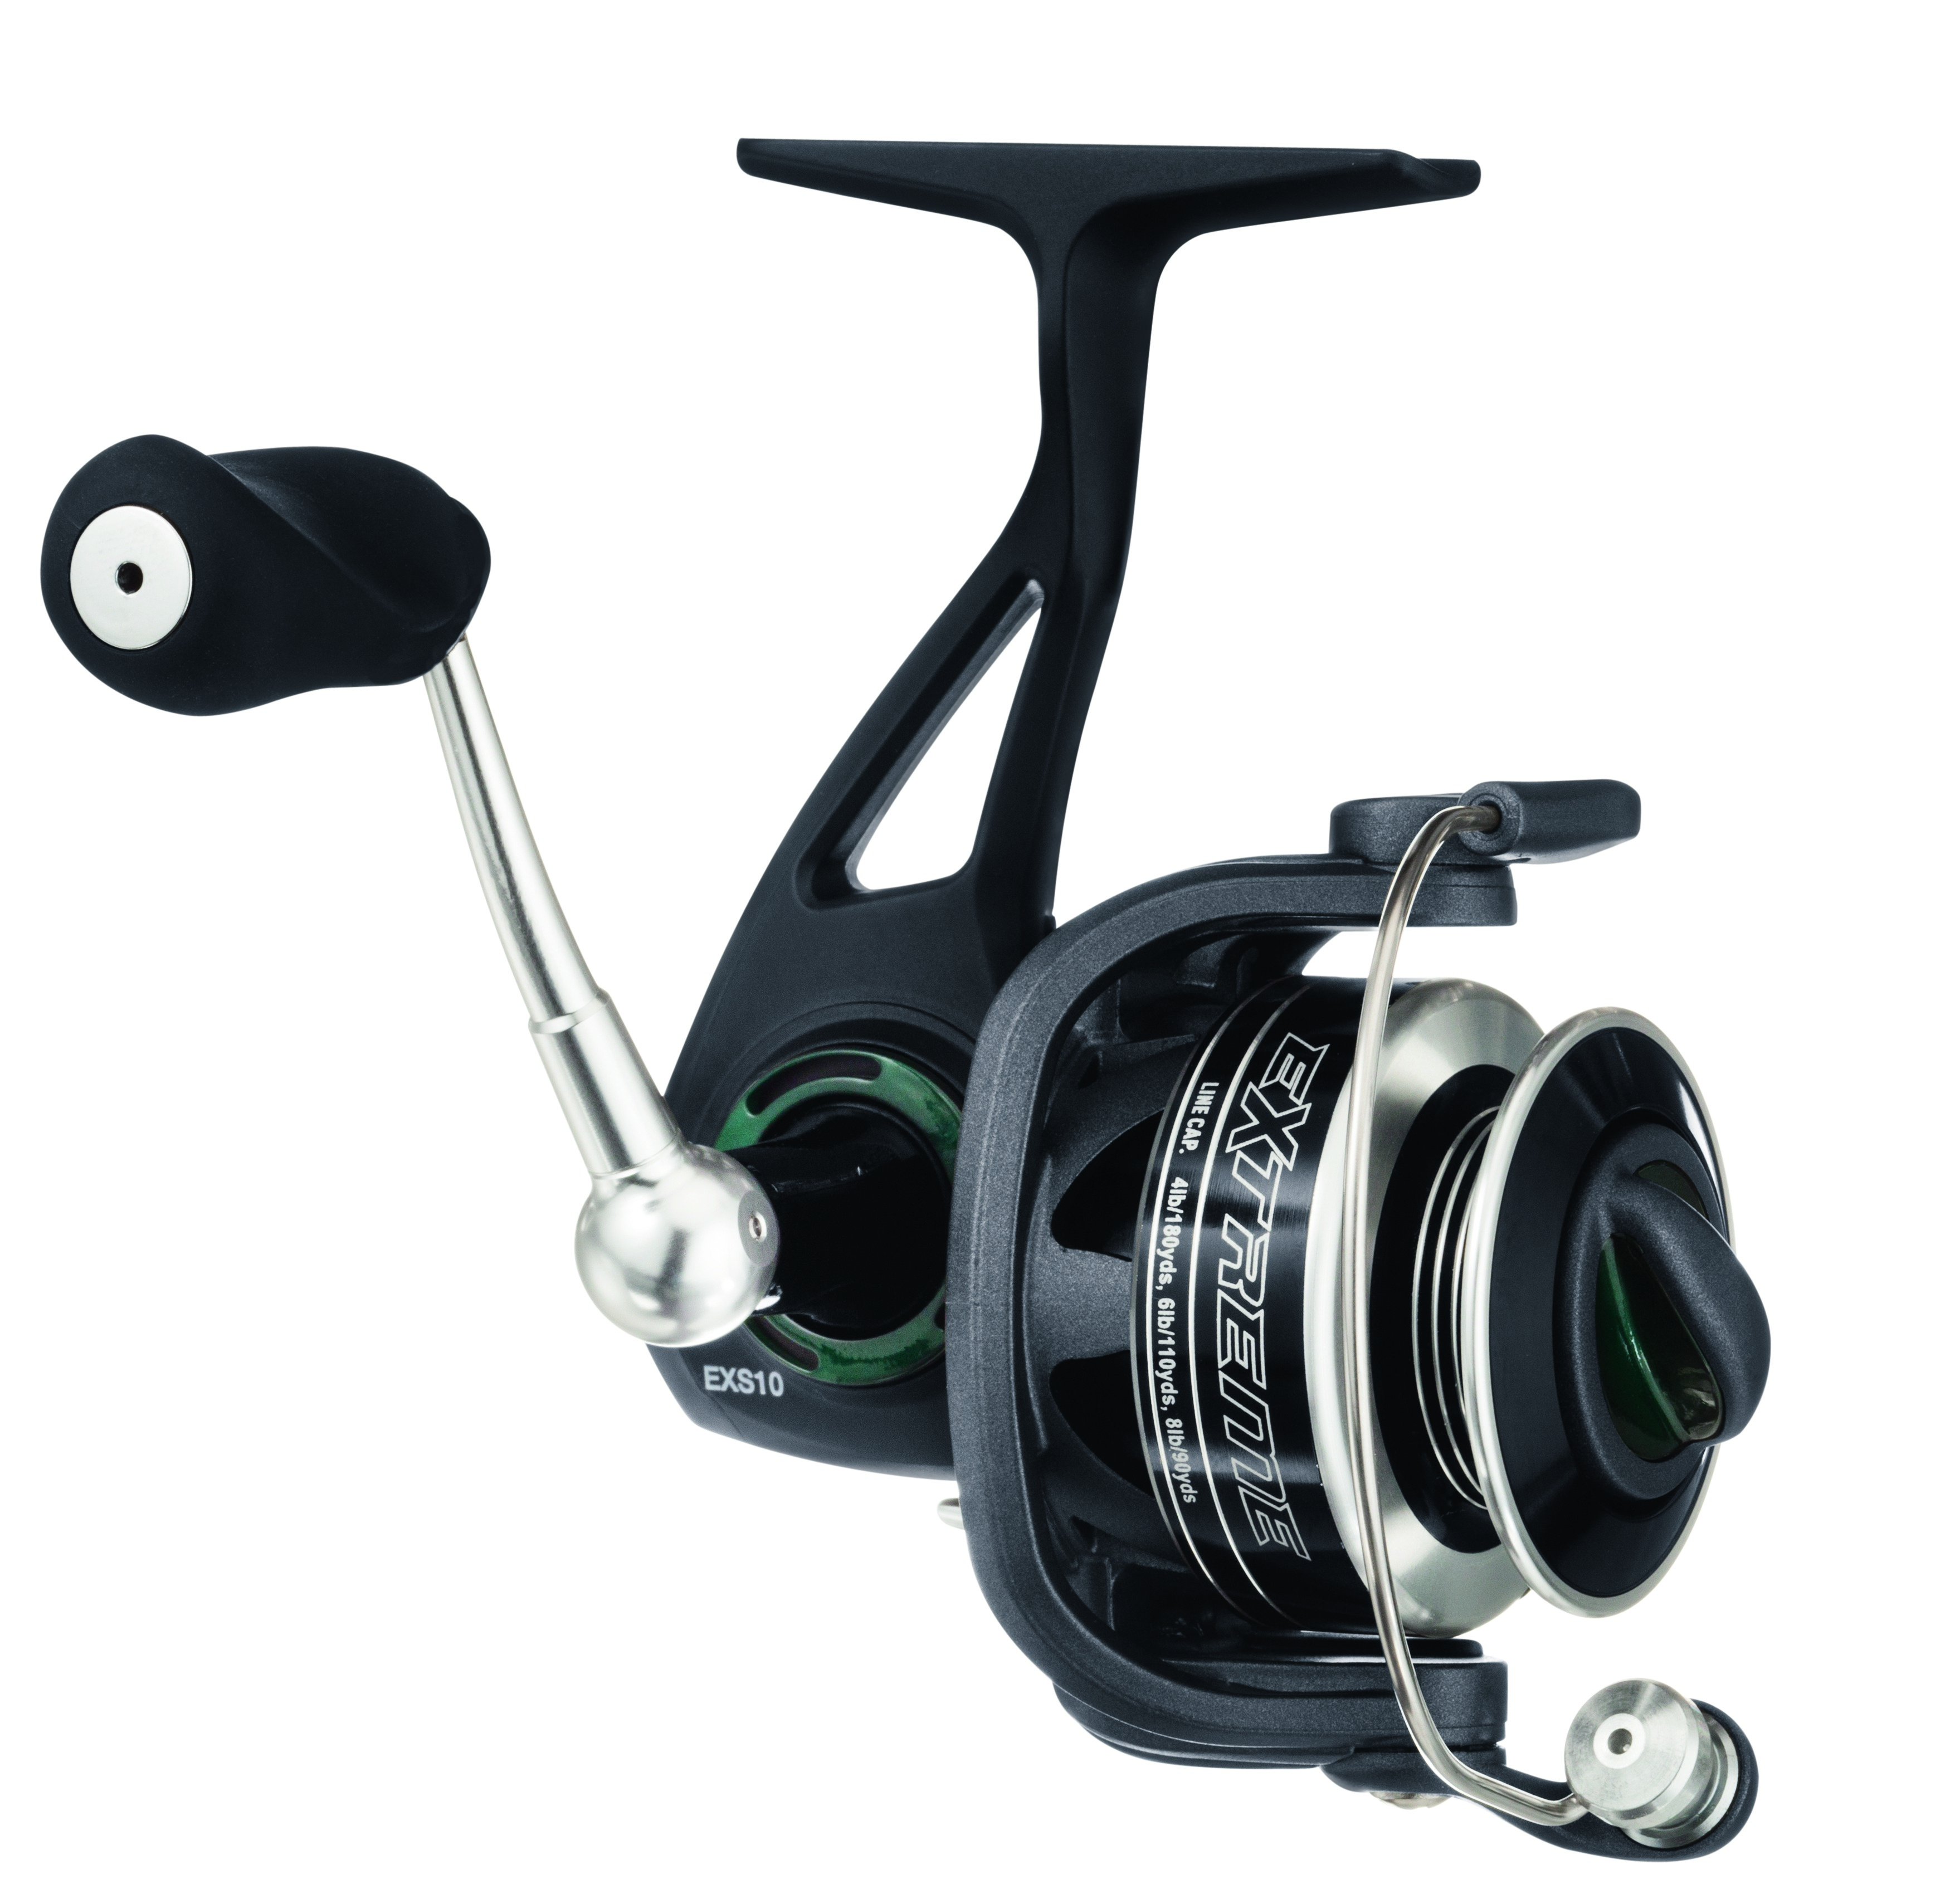  Bass Pro Shops® Extreme Series Spinning Reels 